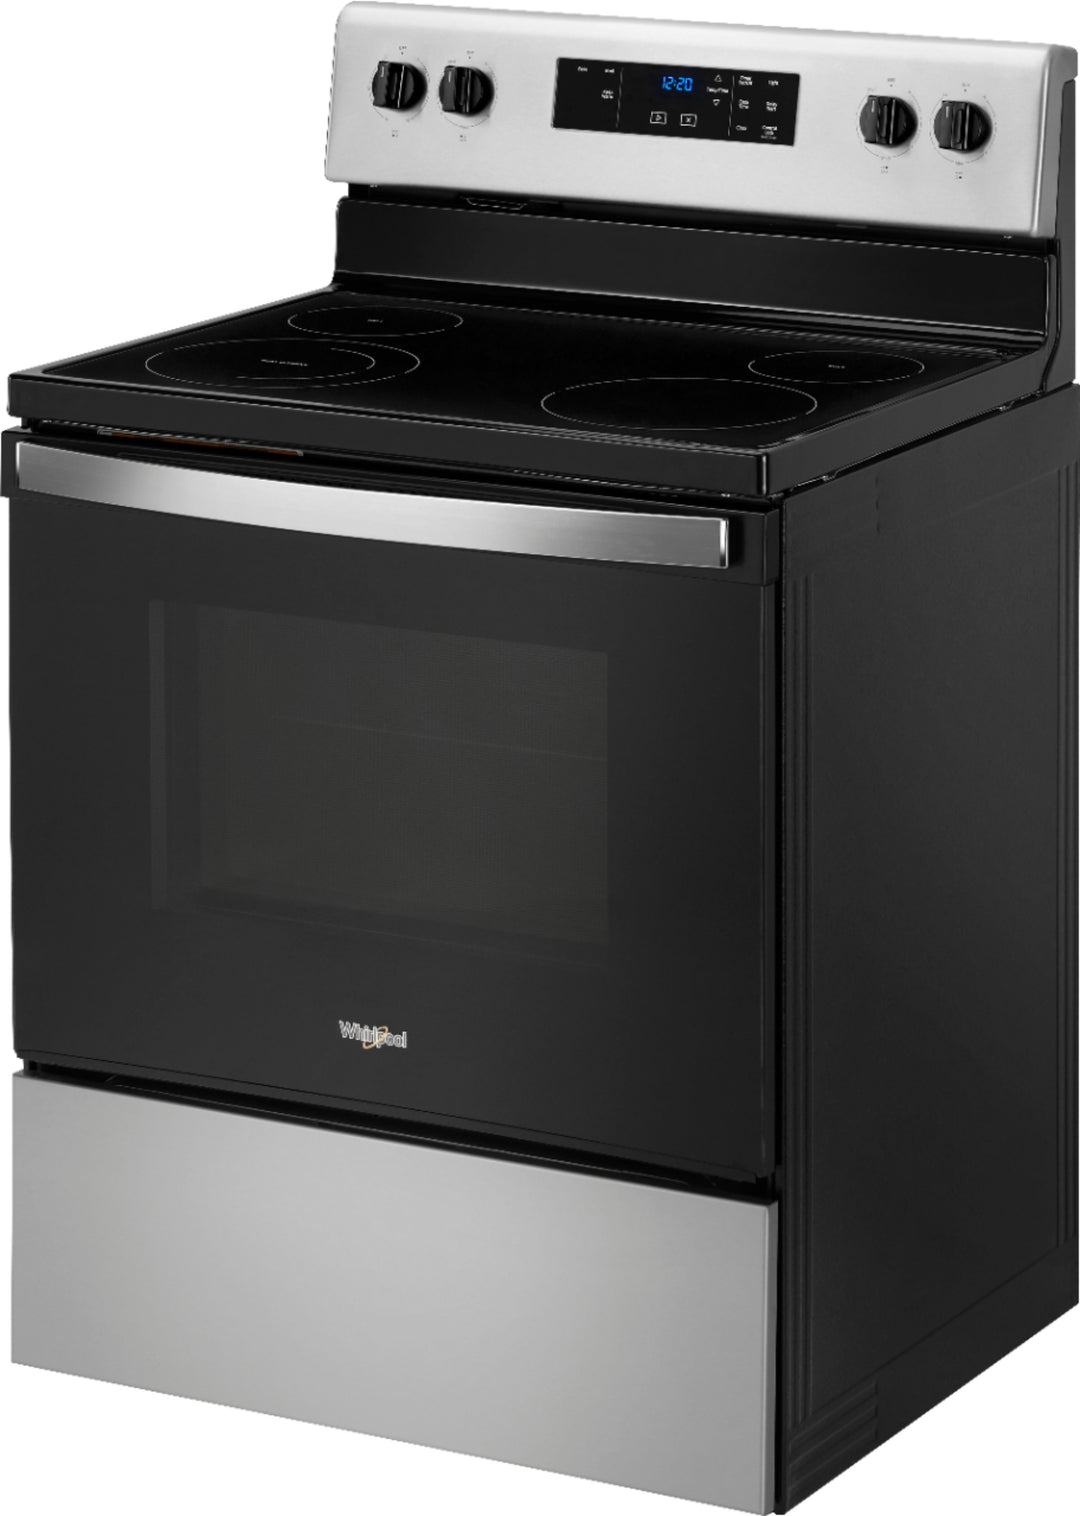 Whirlpool - 5.3 Cu. Ft. Freestanding Electric Range with Keep Warm Setting - Stainless steel_4